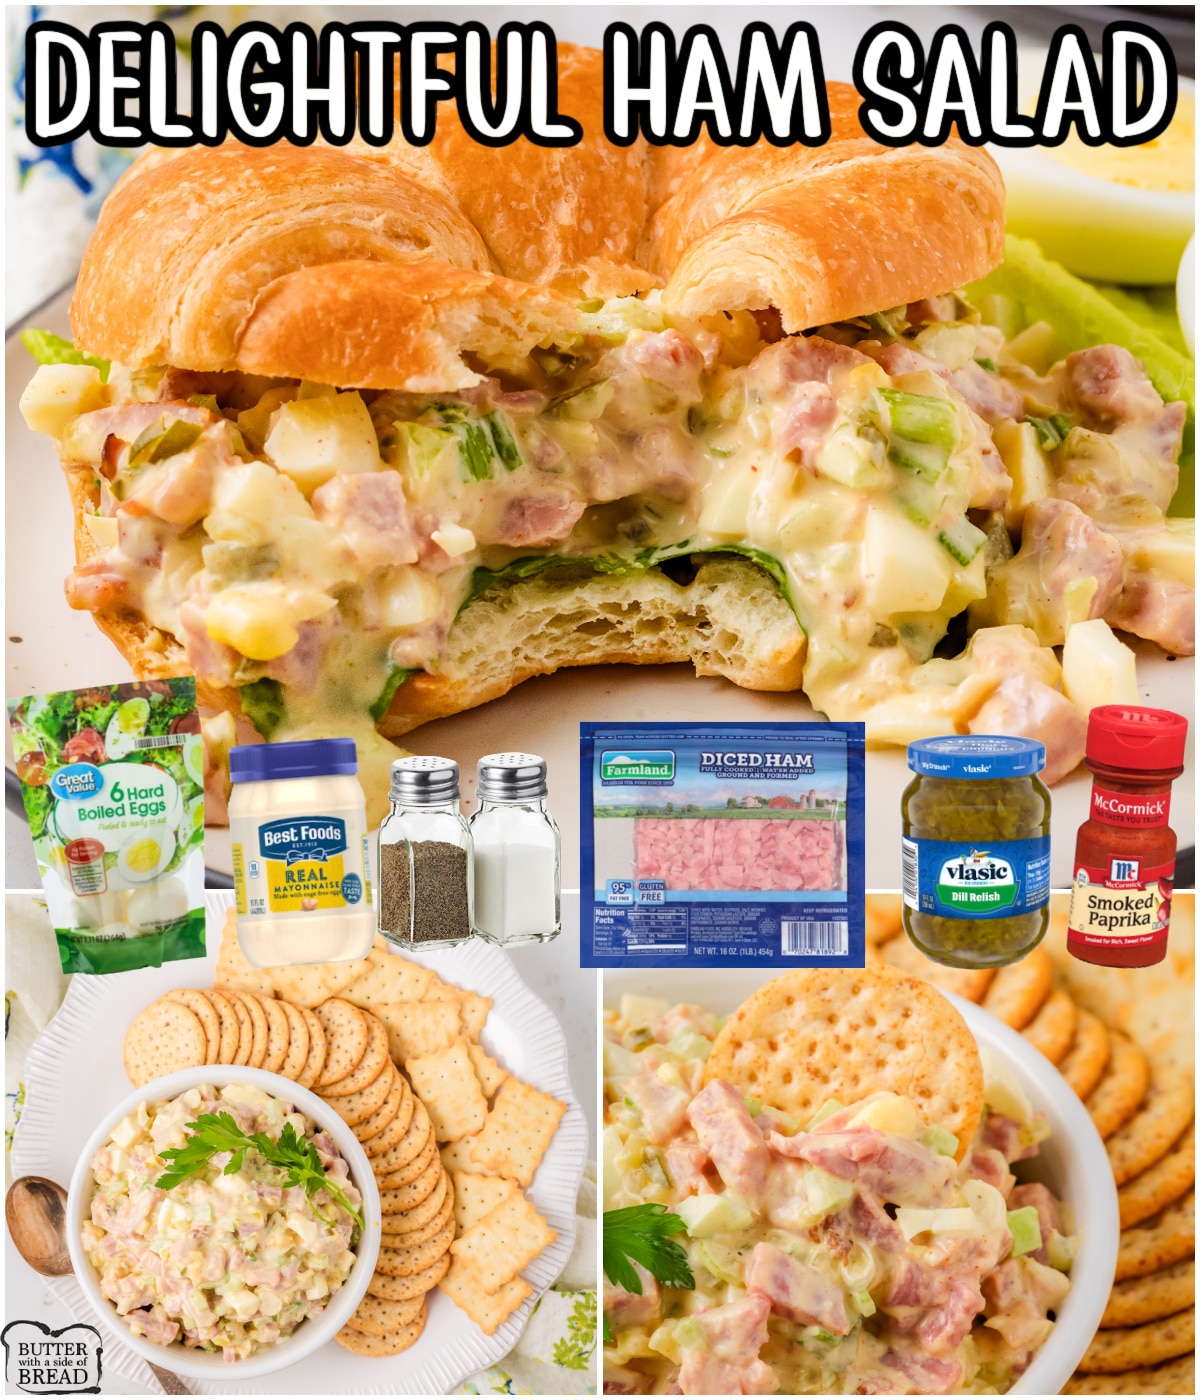 Delightful Old Fashioned Ham Salad with classic ingredients & perfect balance of heartiness & flavor for an appetizer, lunch or light dinner!